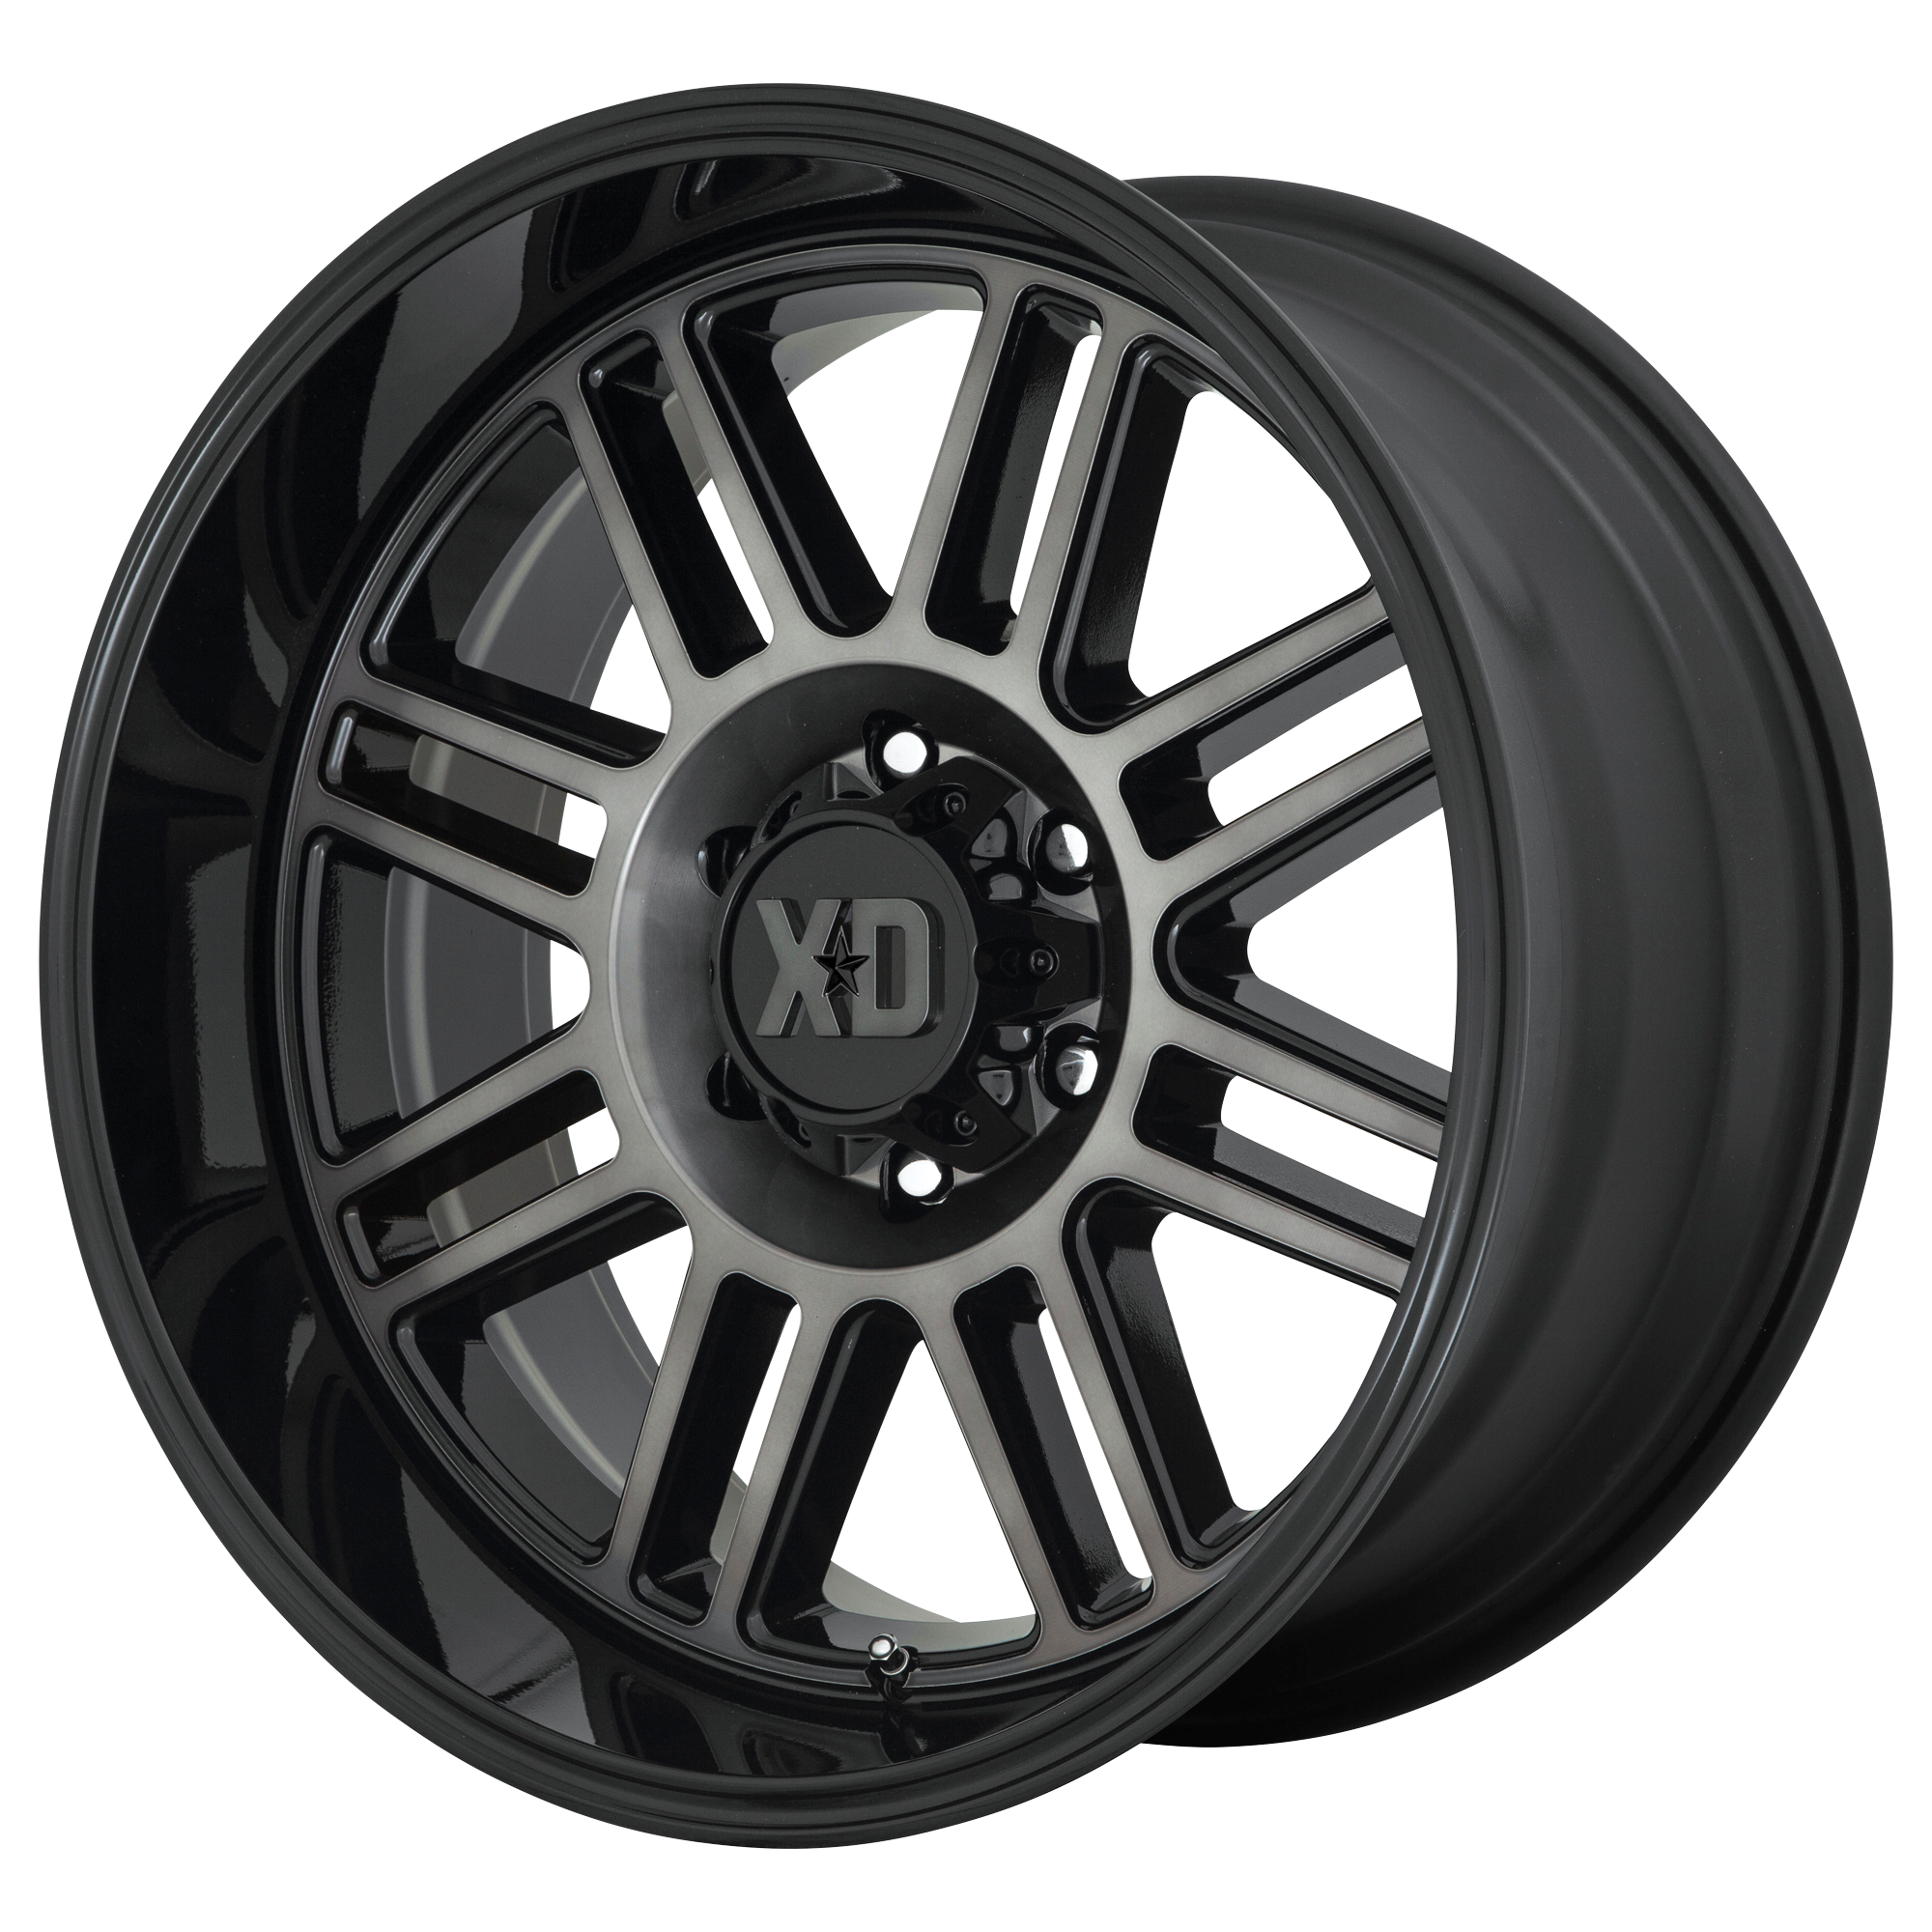 CAGE 20x9 6x114.30 GLOSS BLACK W/ GRAY TINT (18 mm) - Tires and Engine Performance